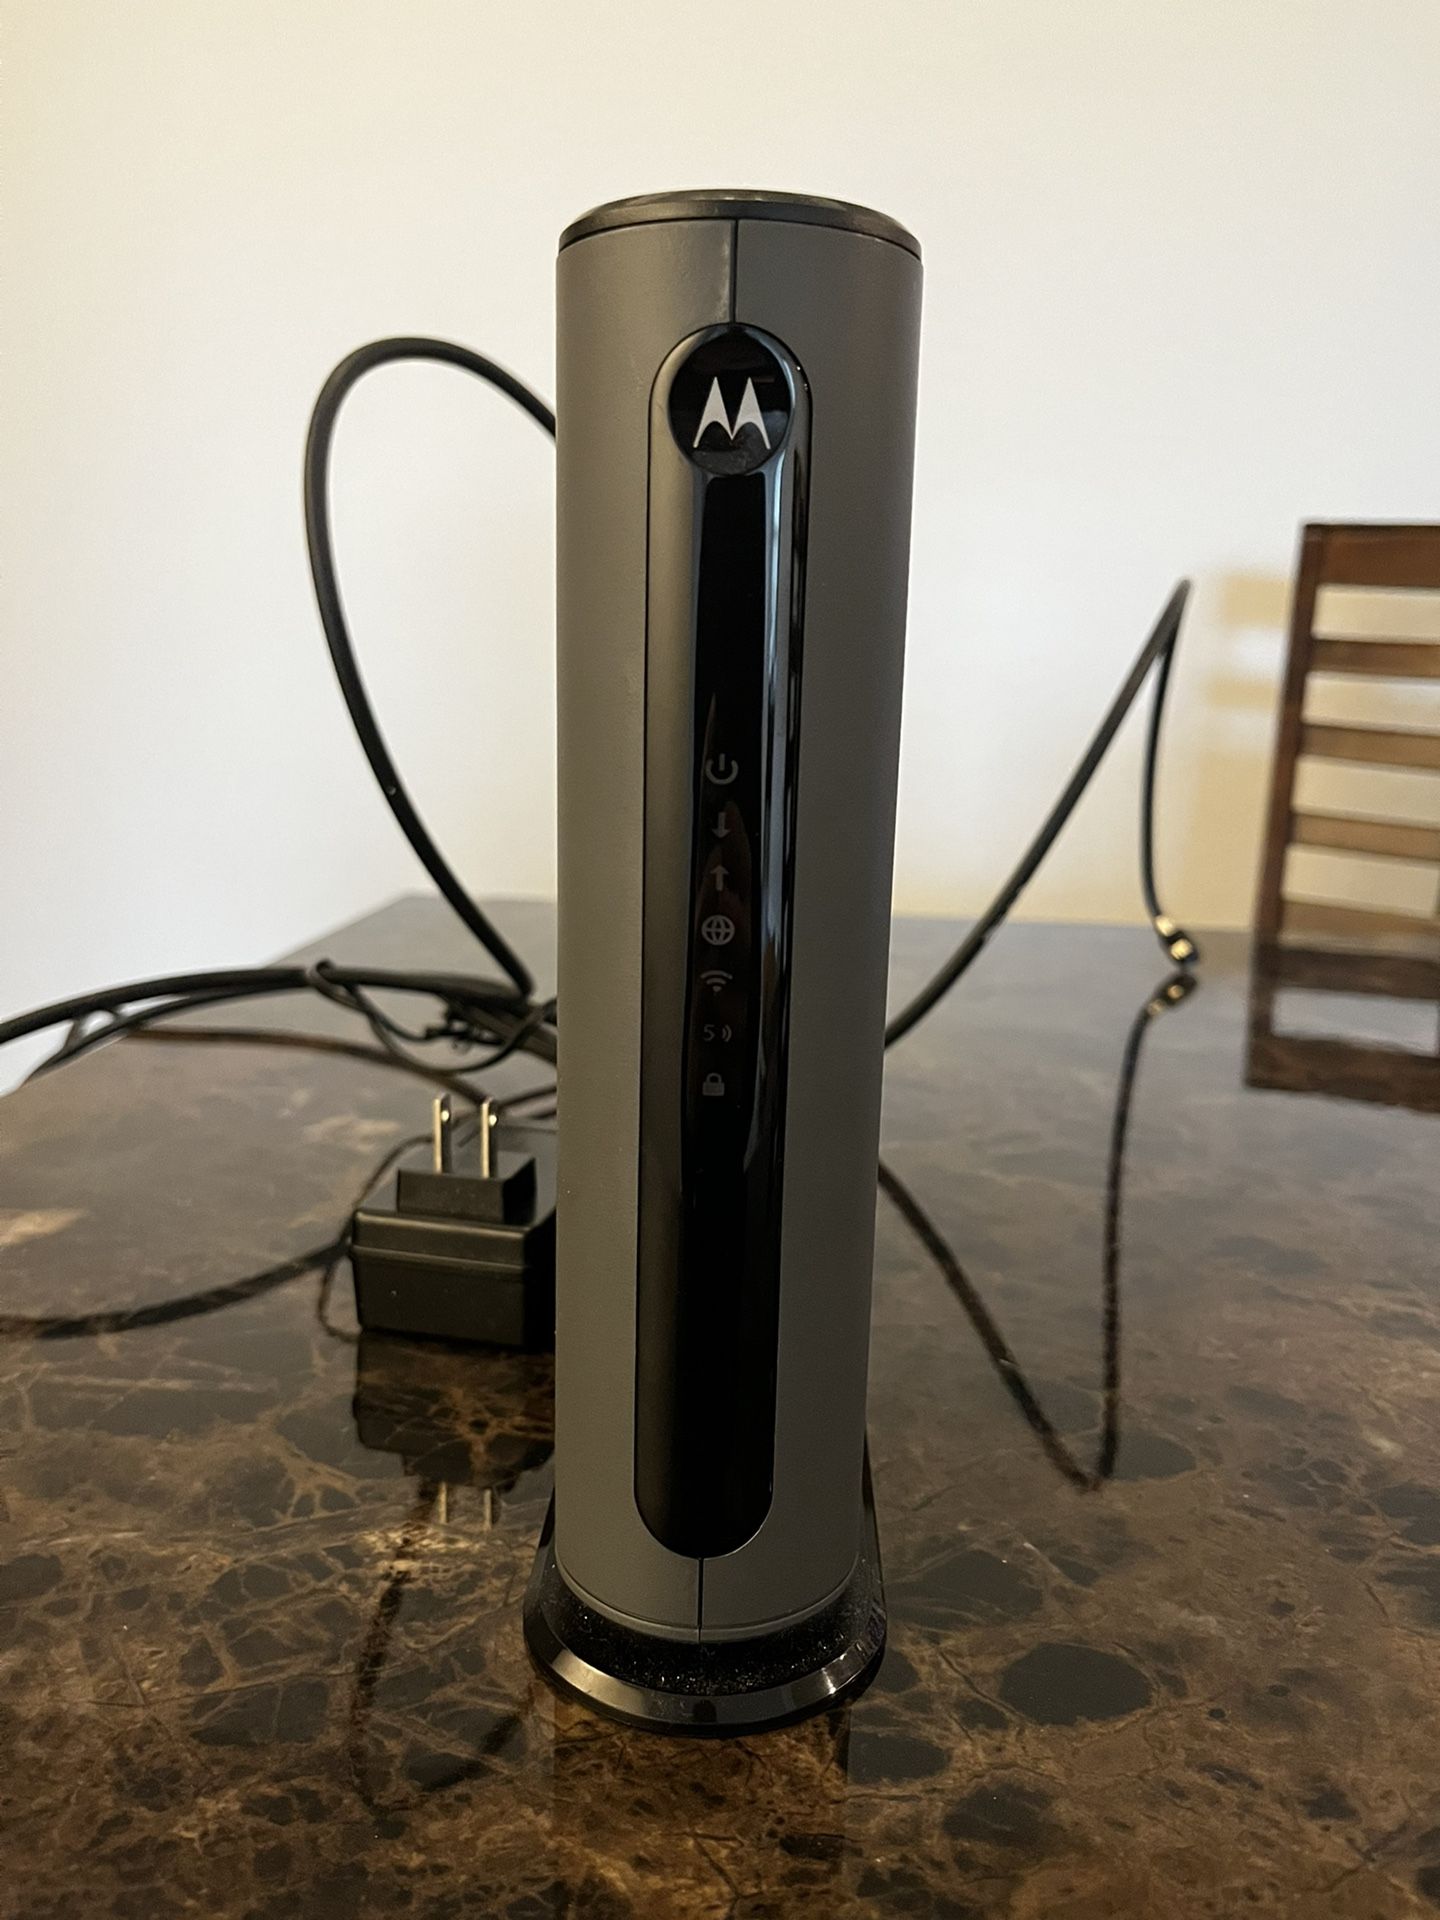 Motorola High Speed Cable Modem/Wireless Router